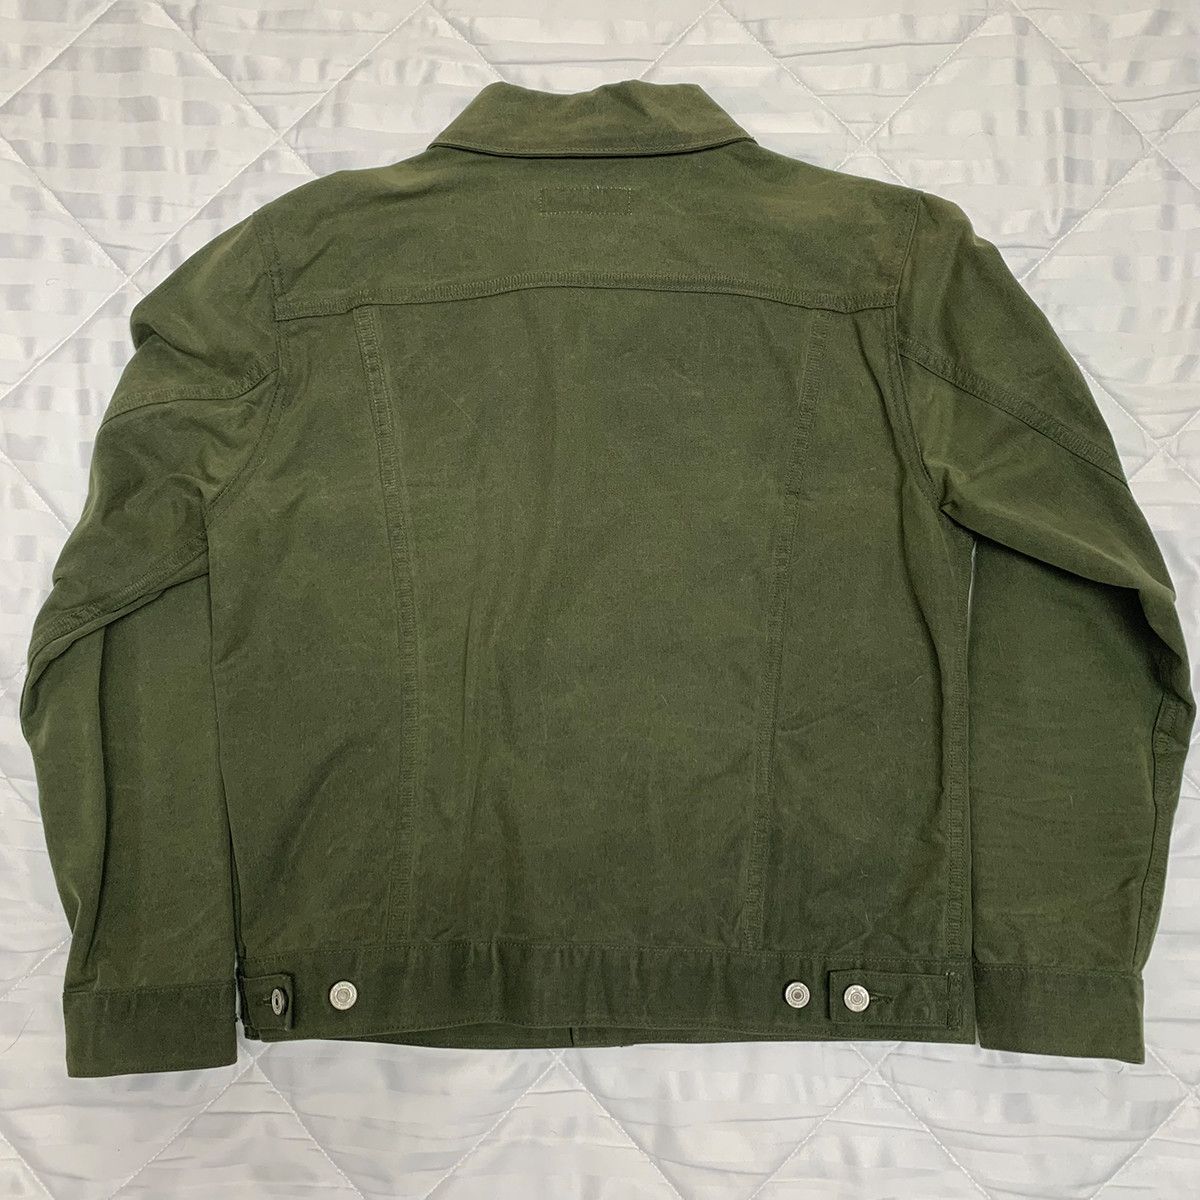 Gustin Gustin Olive Waxed Cotton Trucker Jacket Size US M / EU 48-50 / 2 - 2 Preview